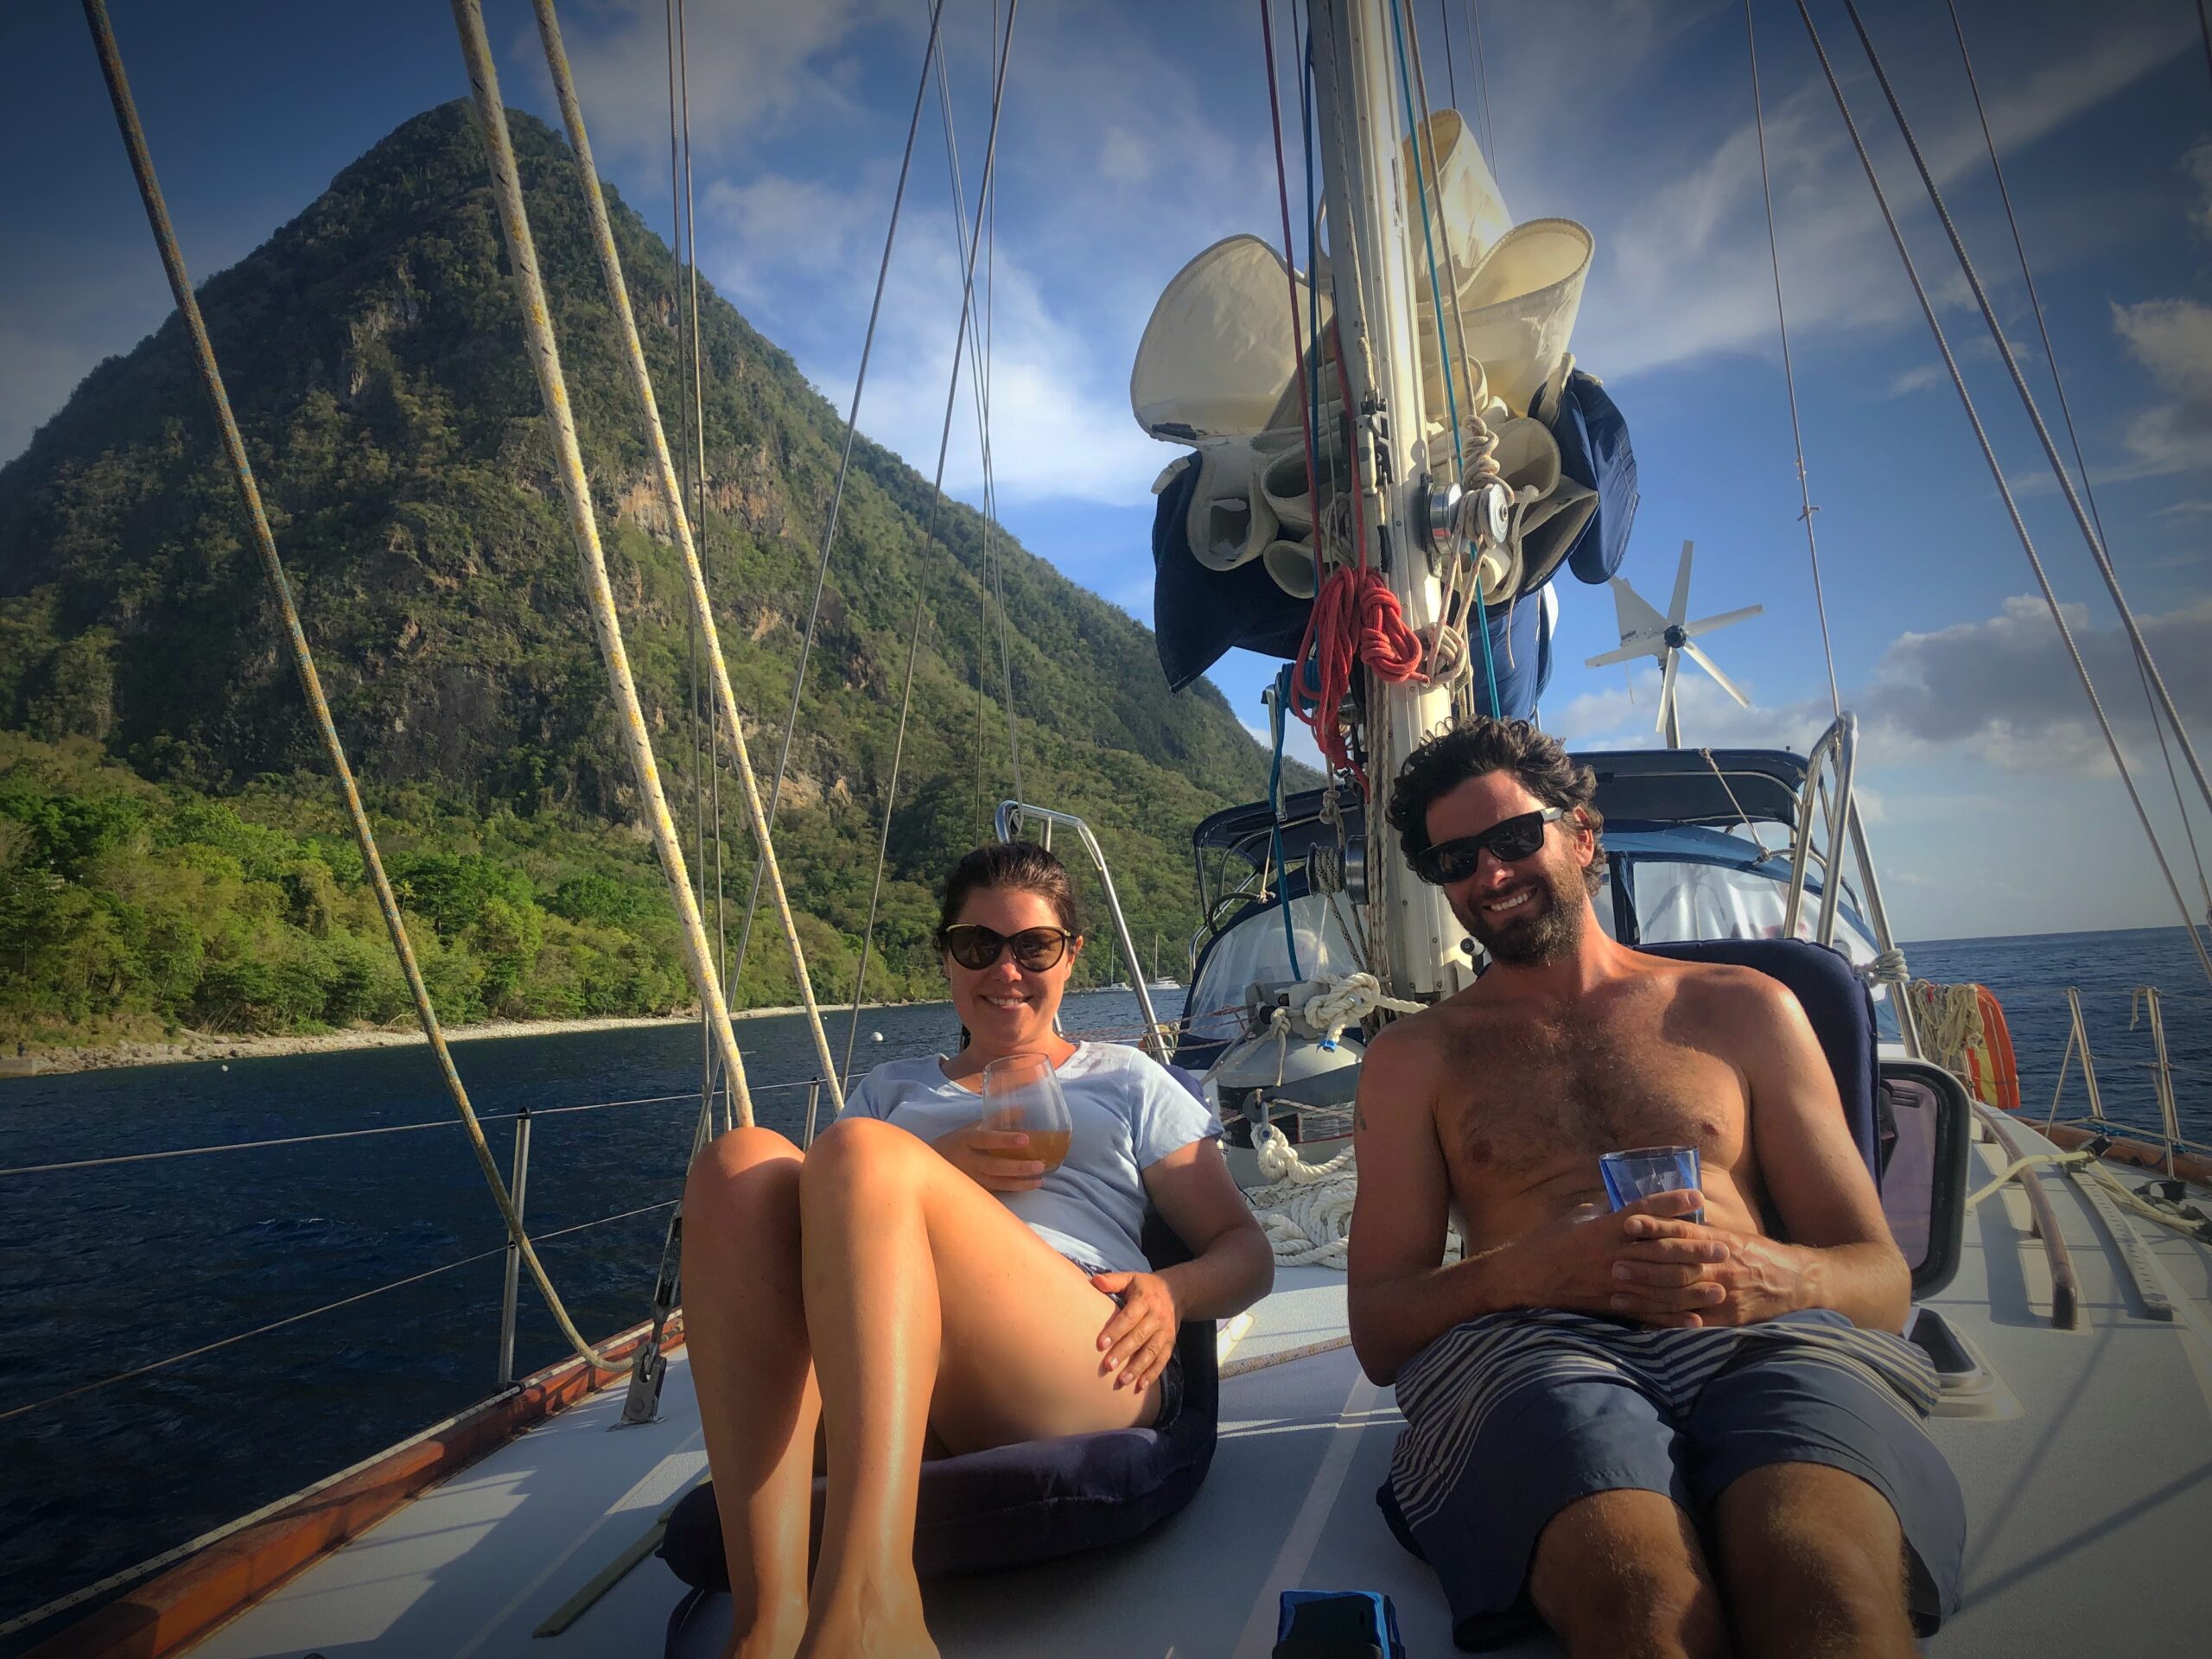 Erin and Her Family Gave Up Their Home to Live on a Yacht, Sailing Around the World